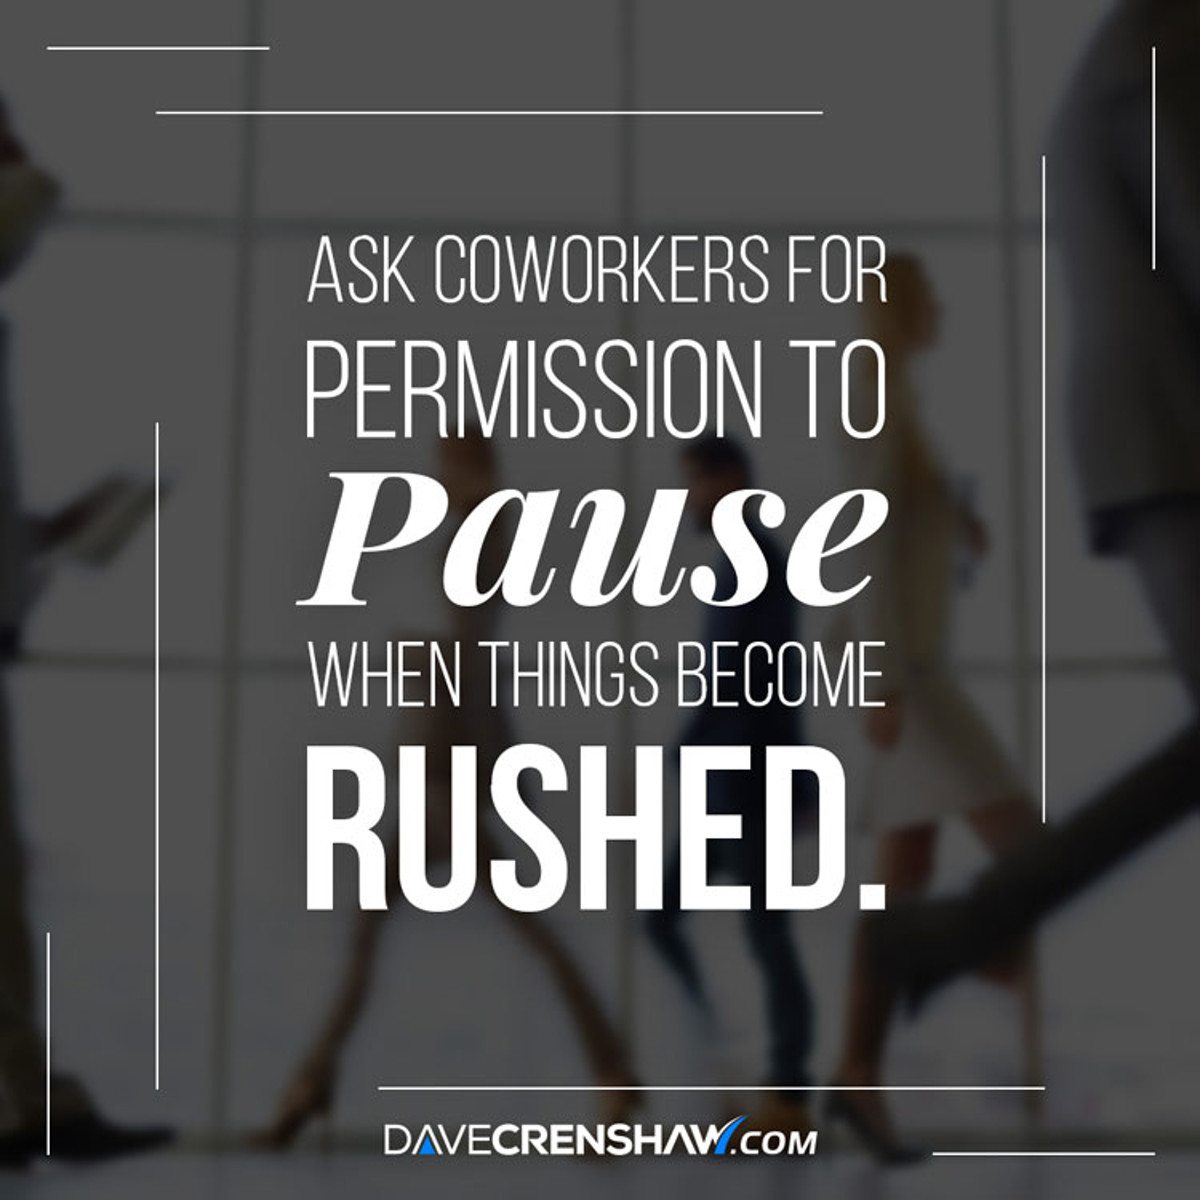 Ask for permission to pause when things get rushed